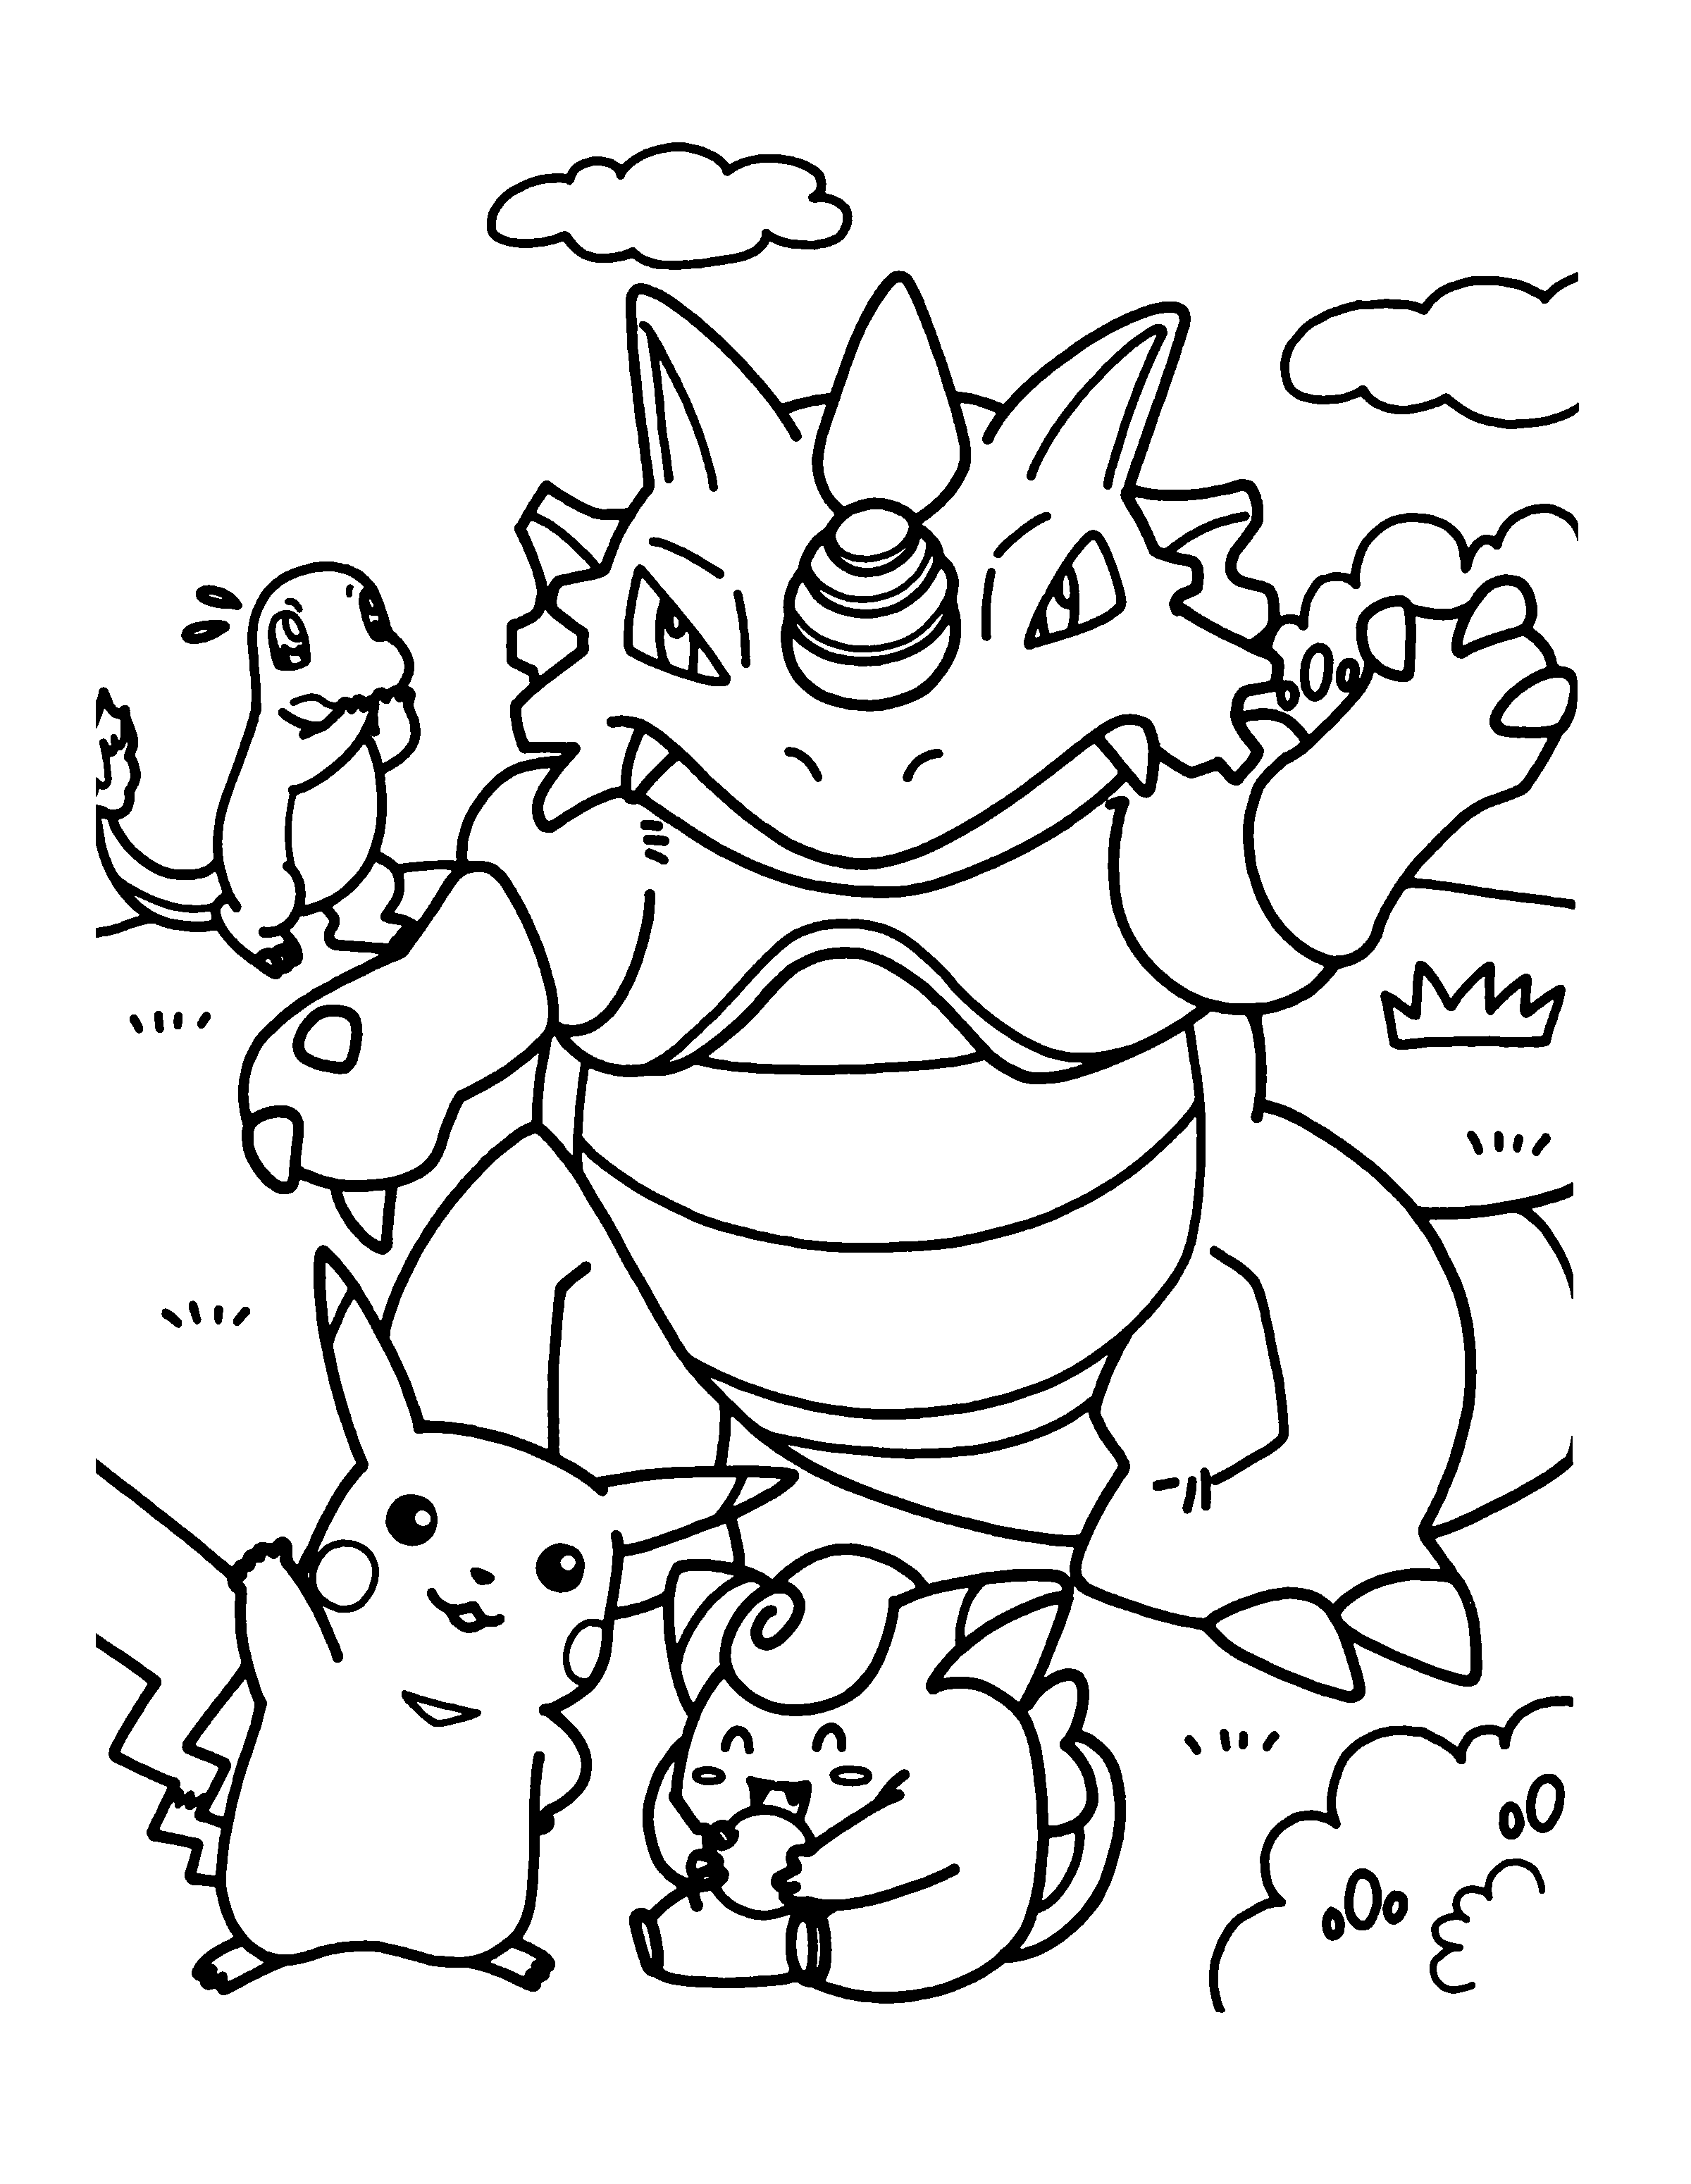 free-pokemon-coloring-pages-for-adults-download-free-pokemon